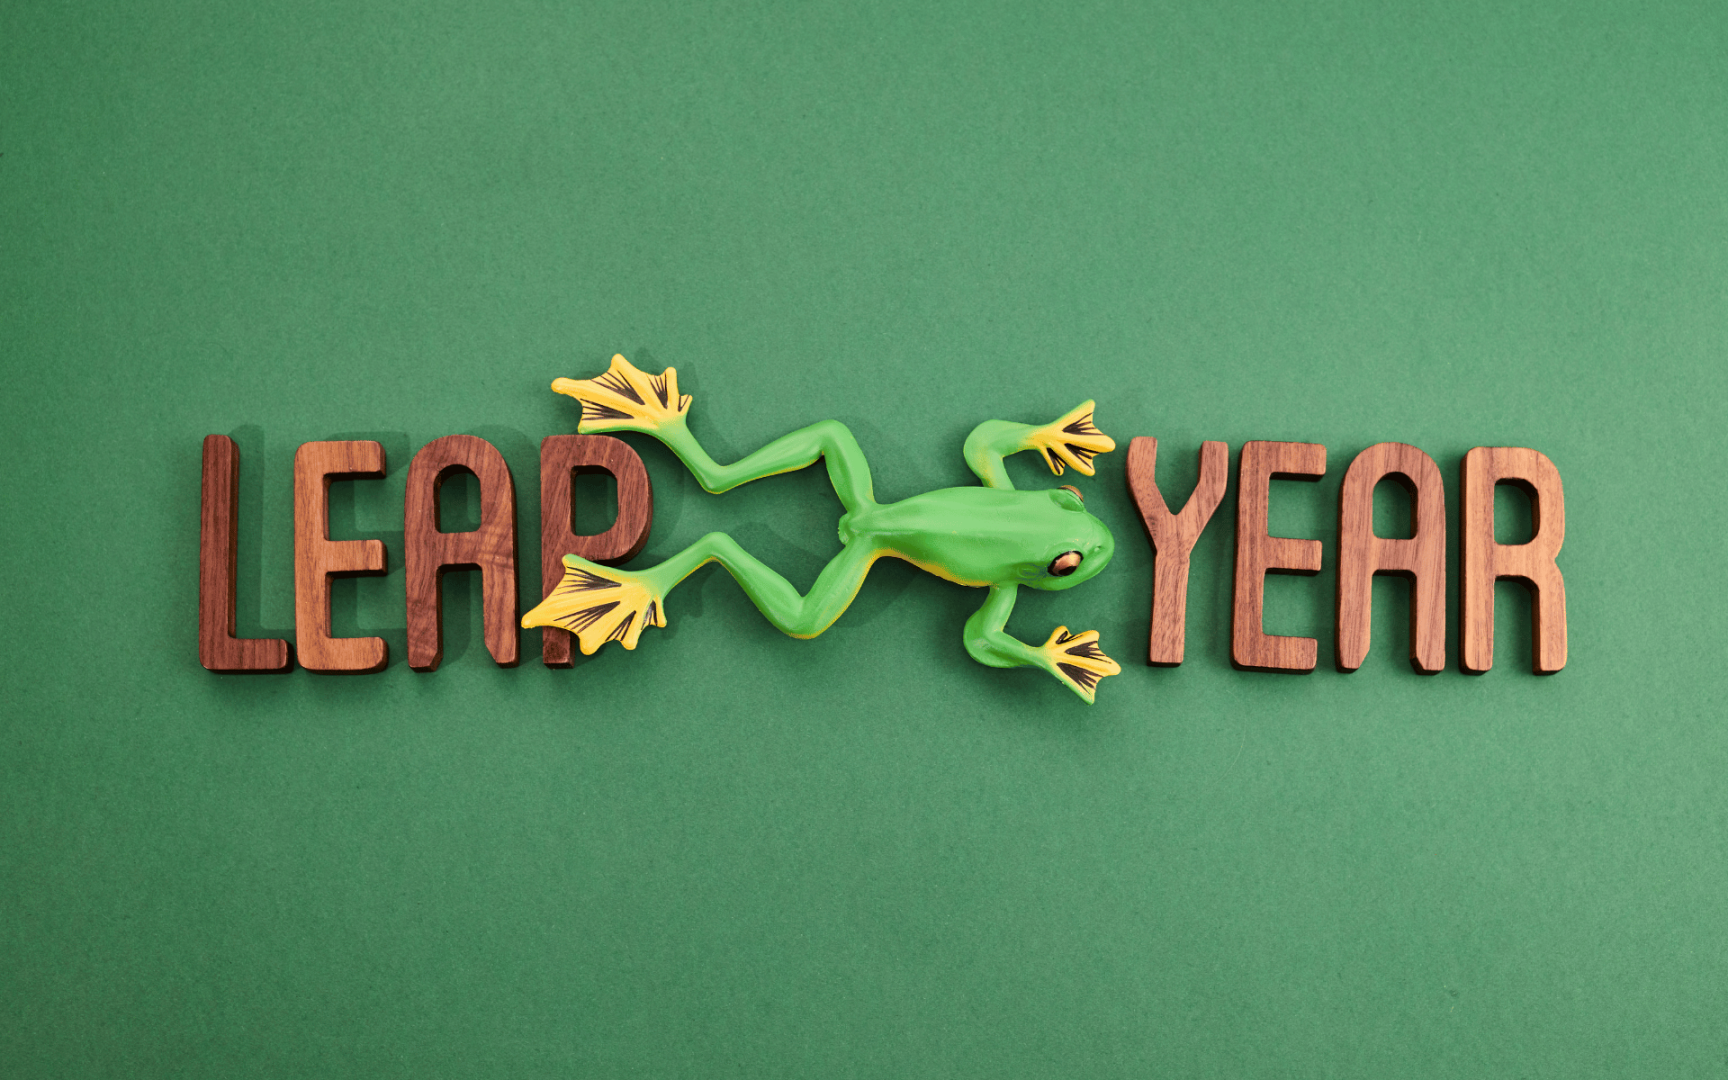 The words leap year with frog on green background